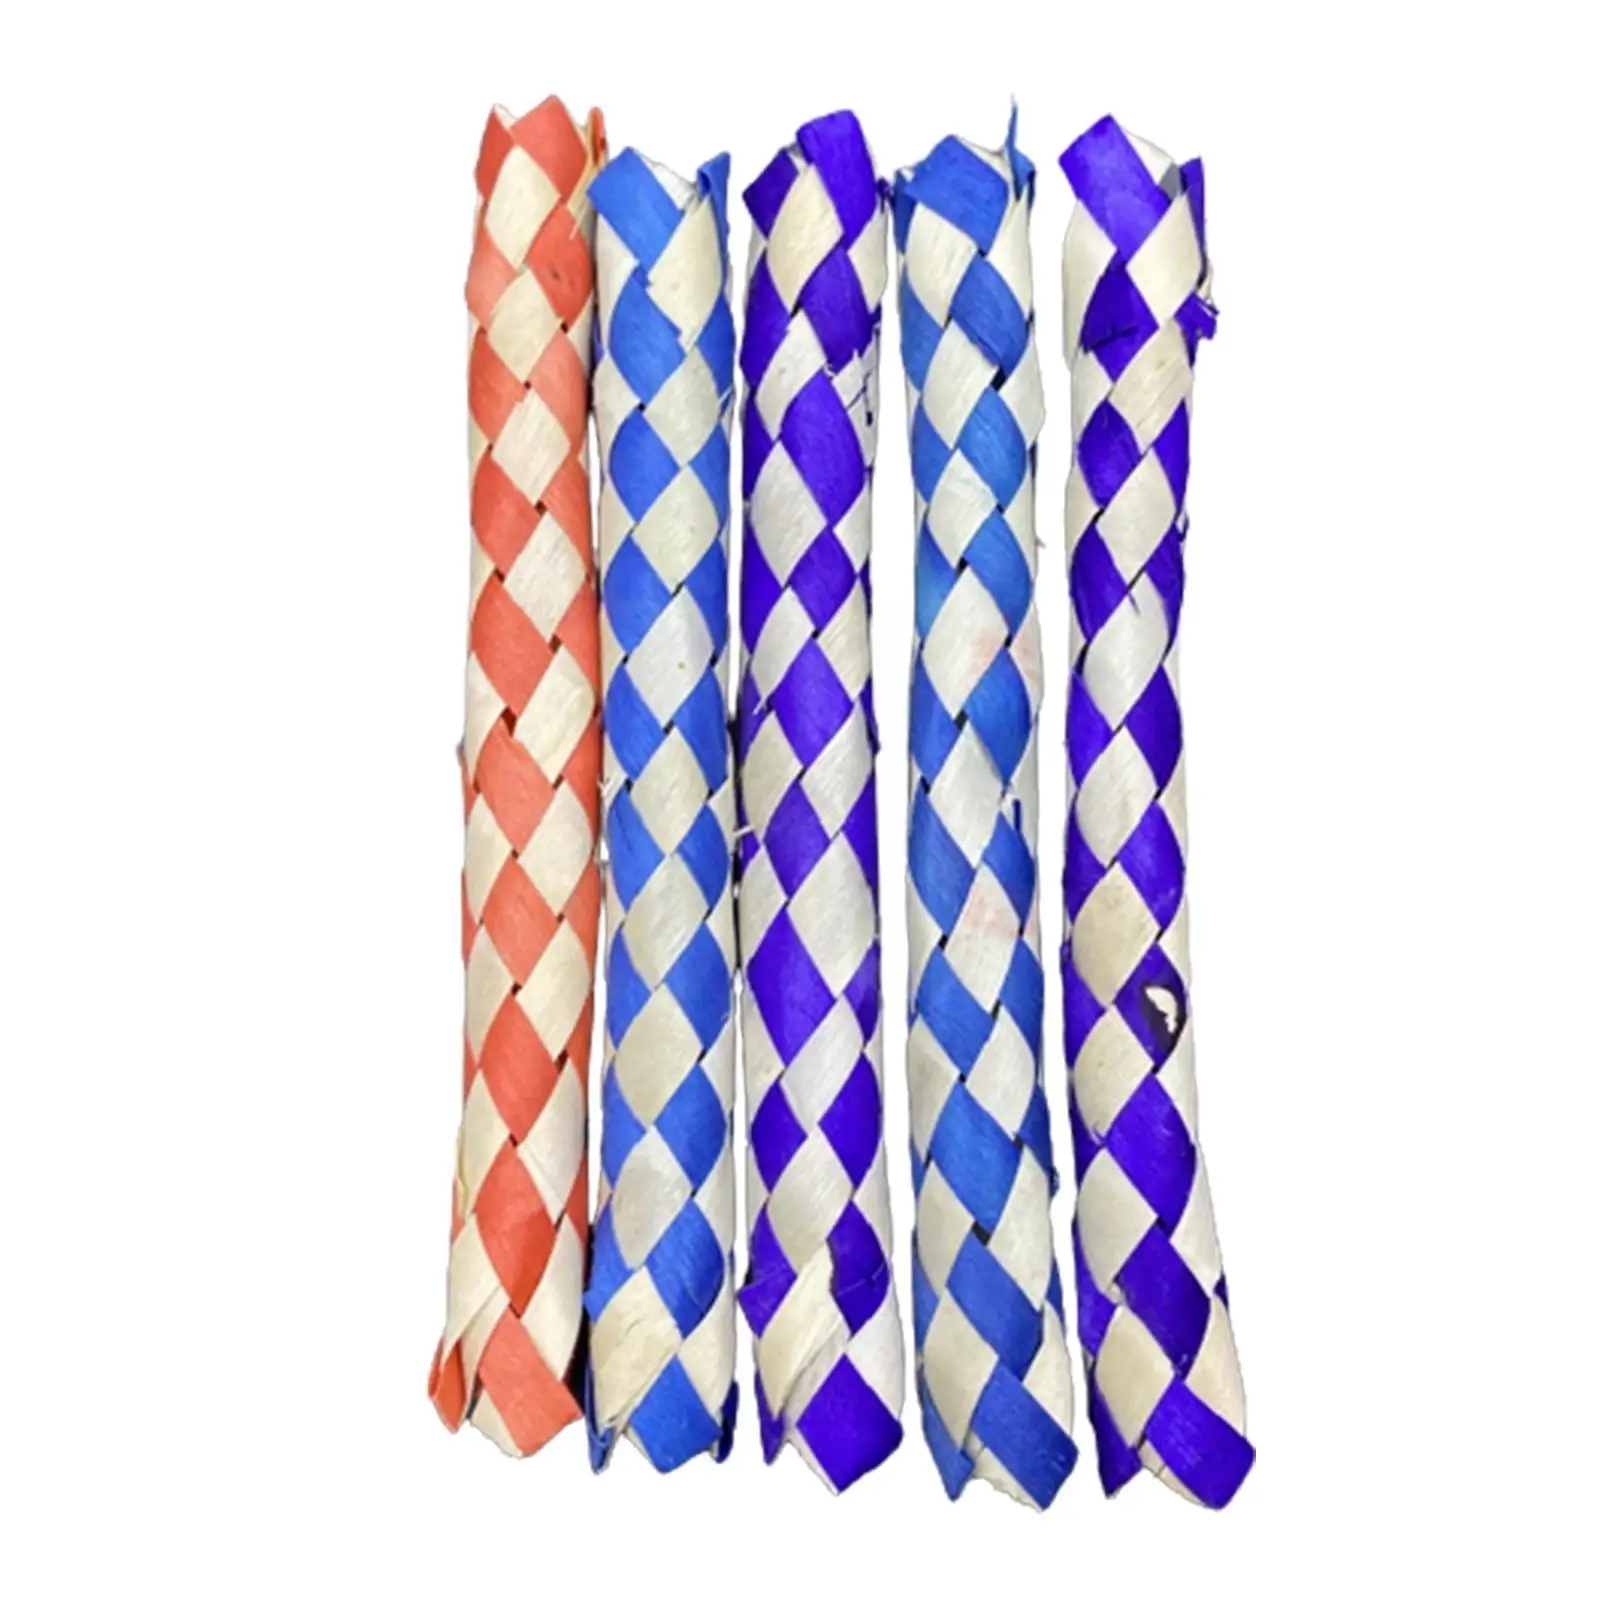 

15cm Finger Traps Classic Chinese Bamboo Tube Finger Away Replacement Give Prank Diy Toys Party Kids Prizes Gifts O3h8